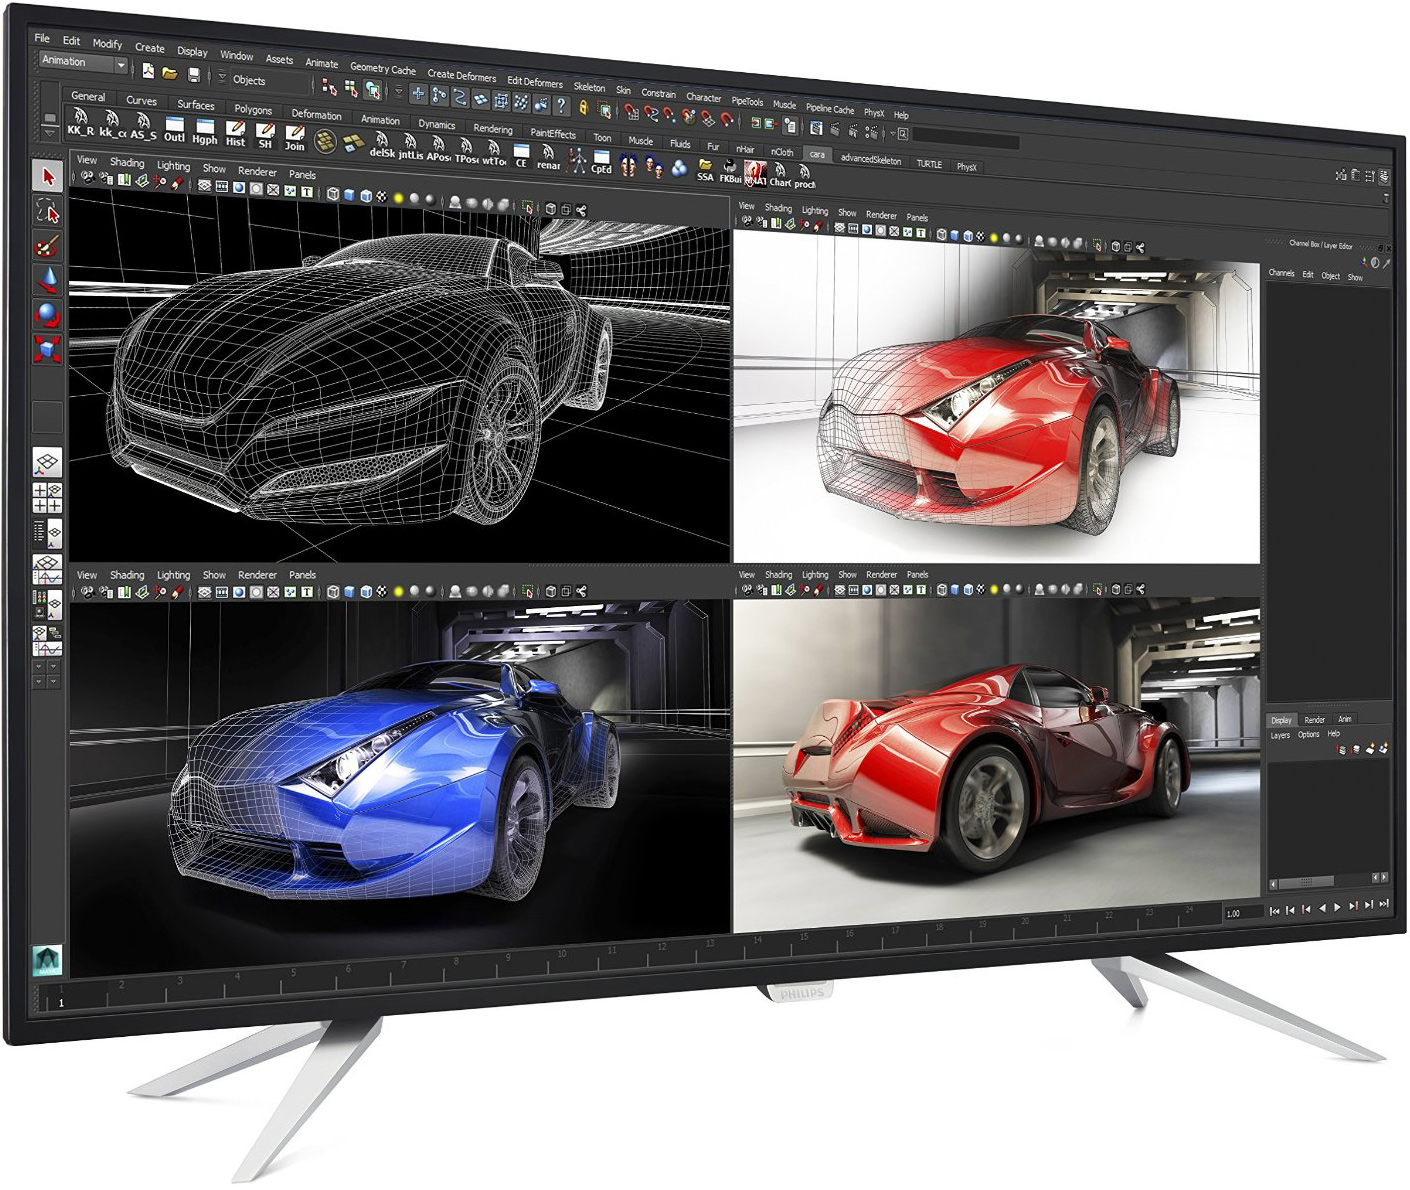 Philips Begins to Sell 43” 4K IPS BDM4350UC Display for $799